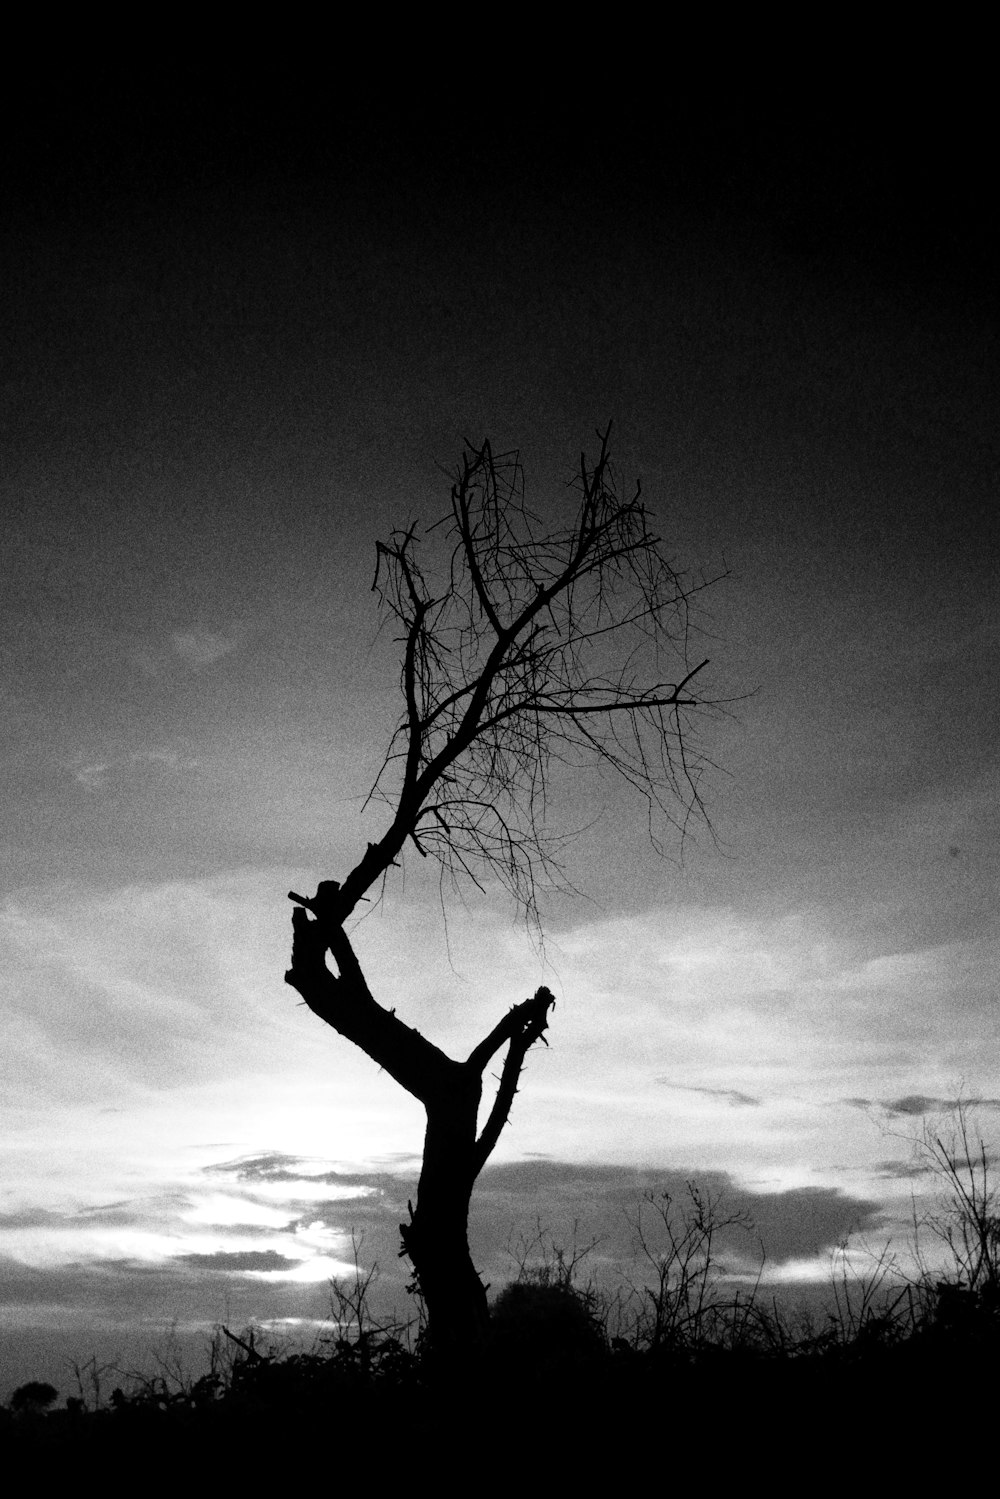 silhouette of man jumping on tree branch